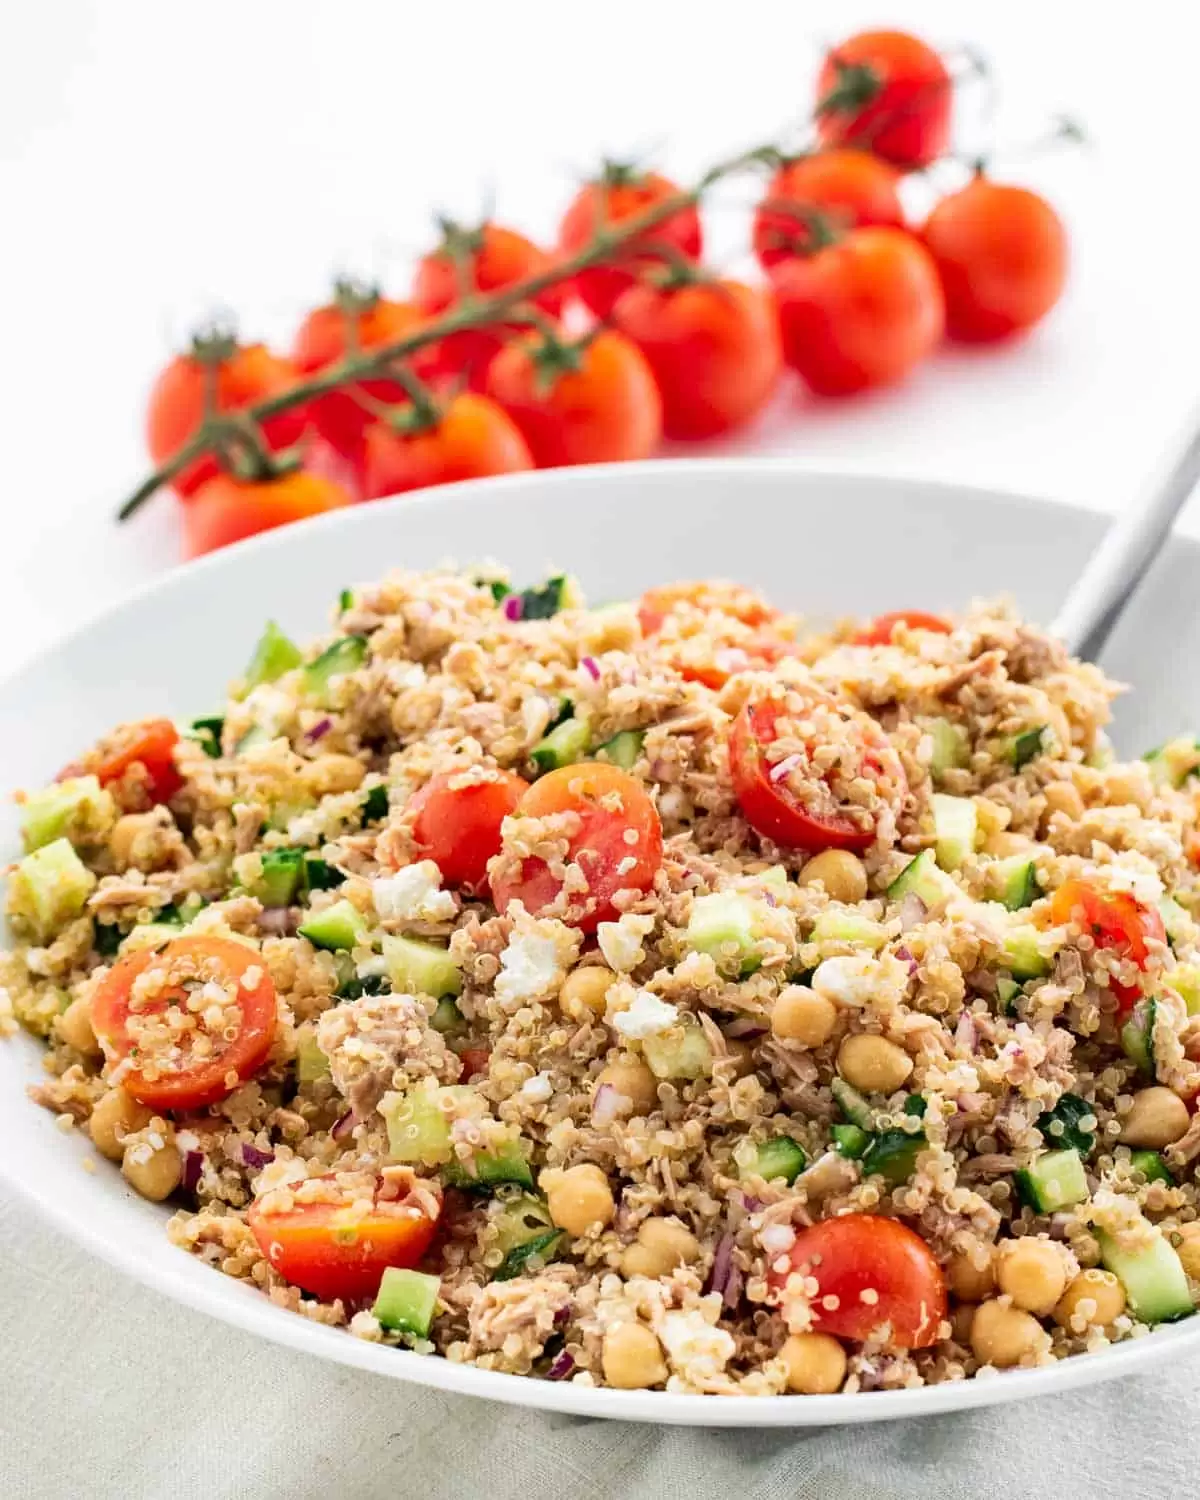 tuna quinoa salad with tomatoes and cucumbers in a white bowl